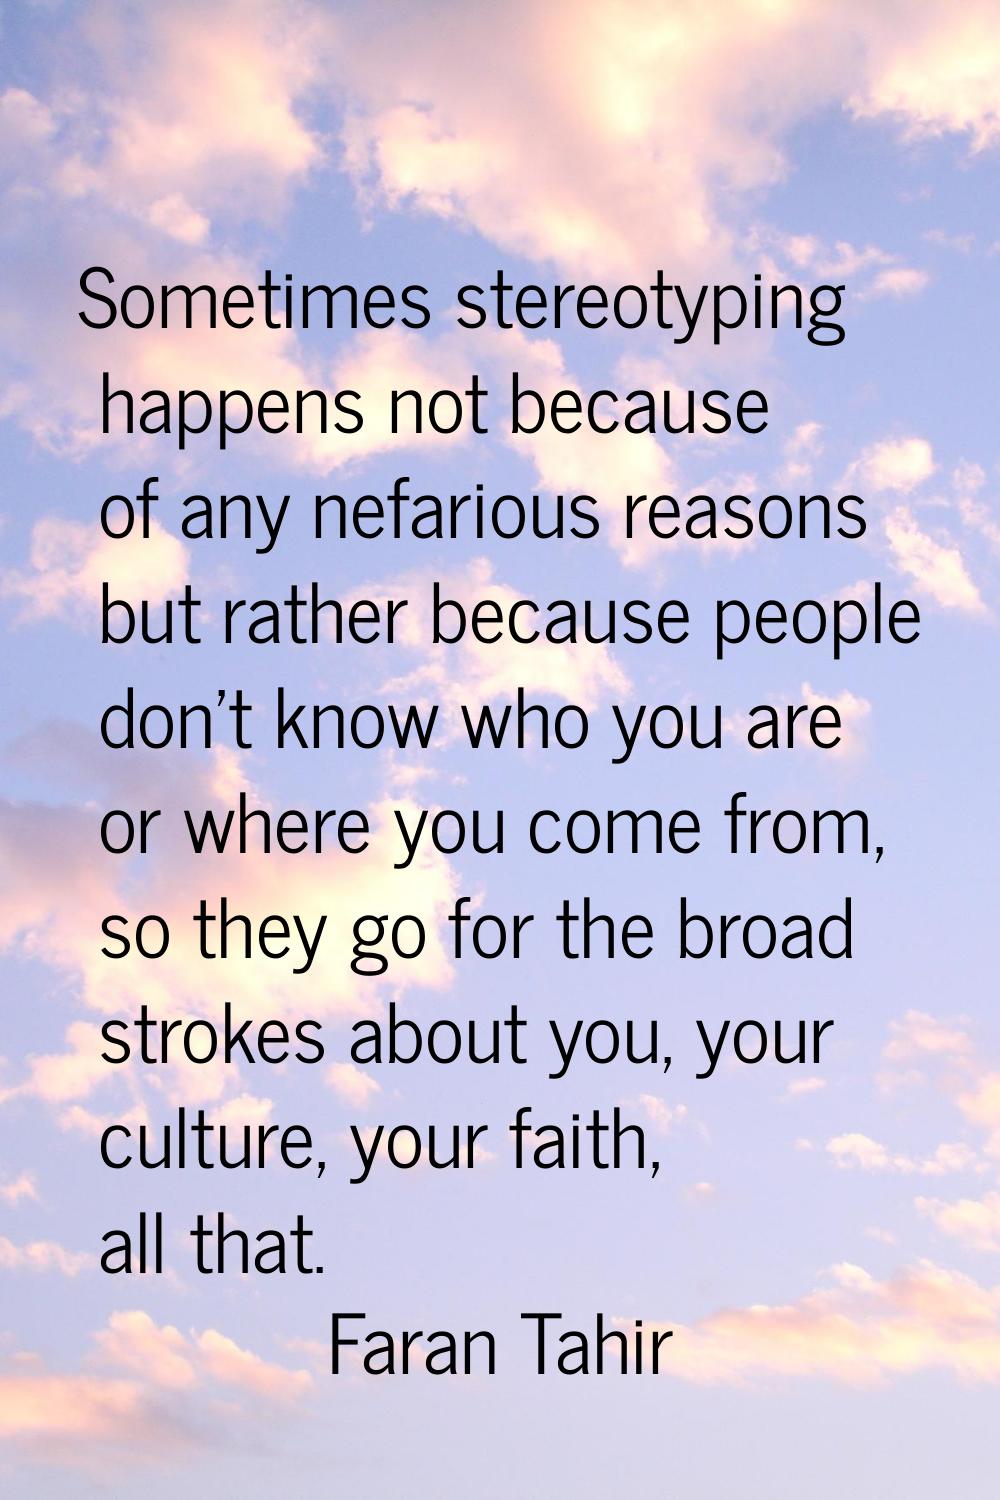 Sometimes stereotyping happens not because of any nefarious reasons but rather because people don't